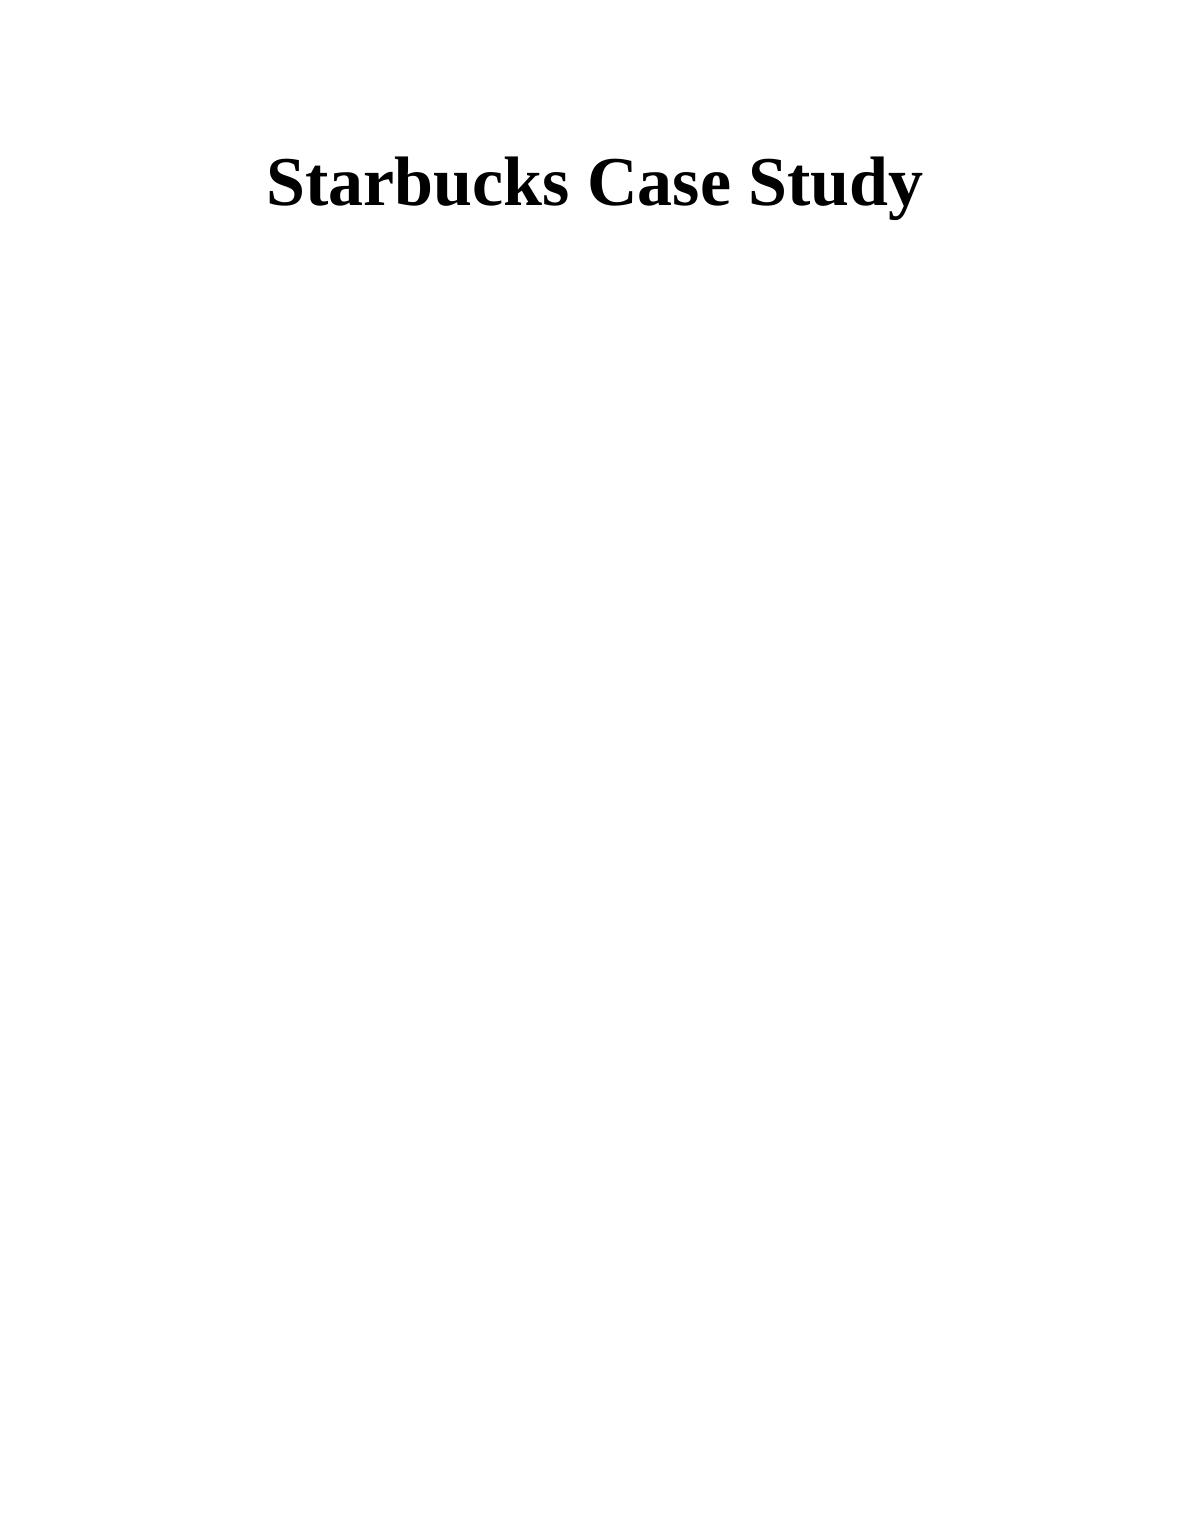 Starbucks Case Study: SWOT and PESTLE Analysis, Influence of CSR, Leadership Styles, and Organisational Culture_1